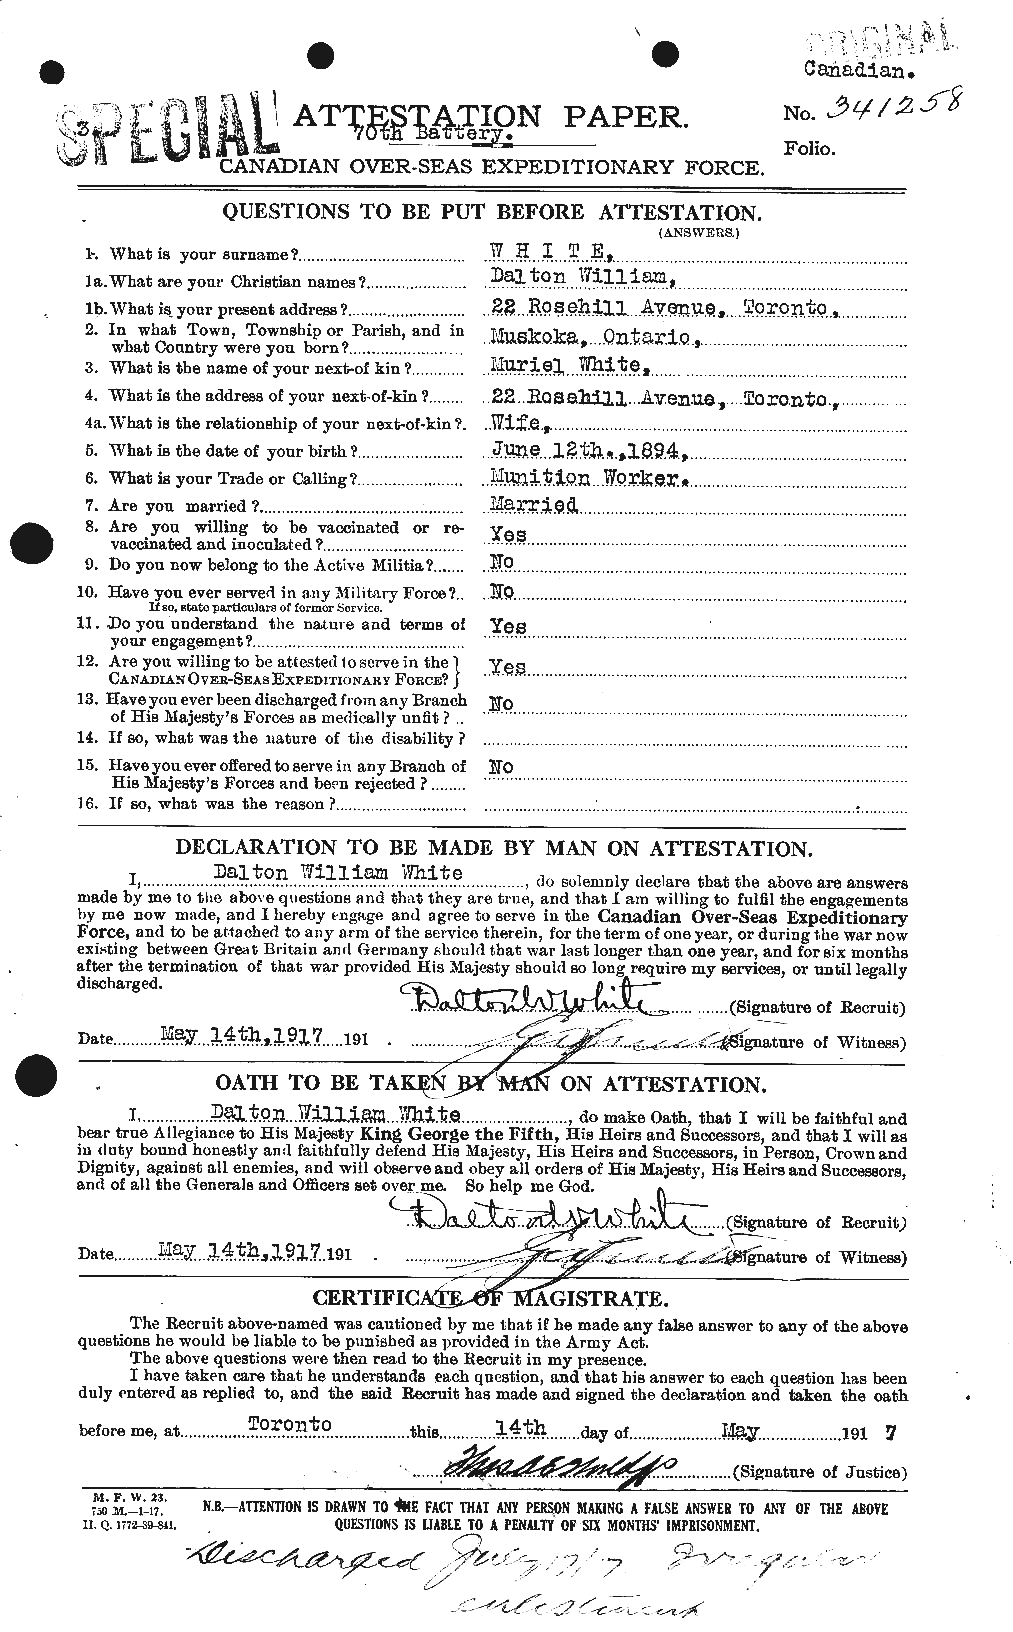 Personnel Records of the First World War - CEF 669993a